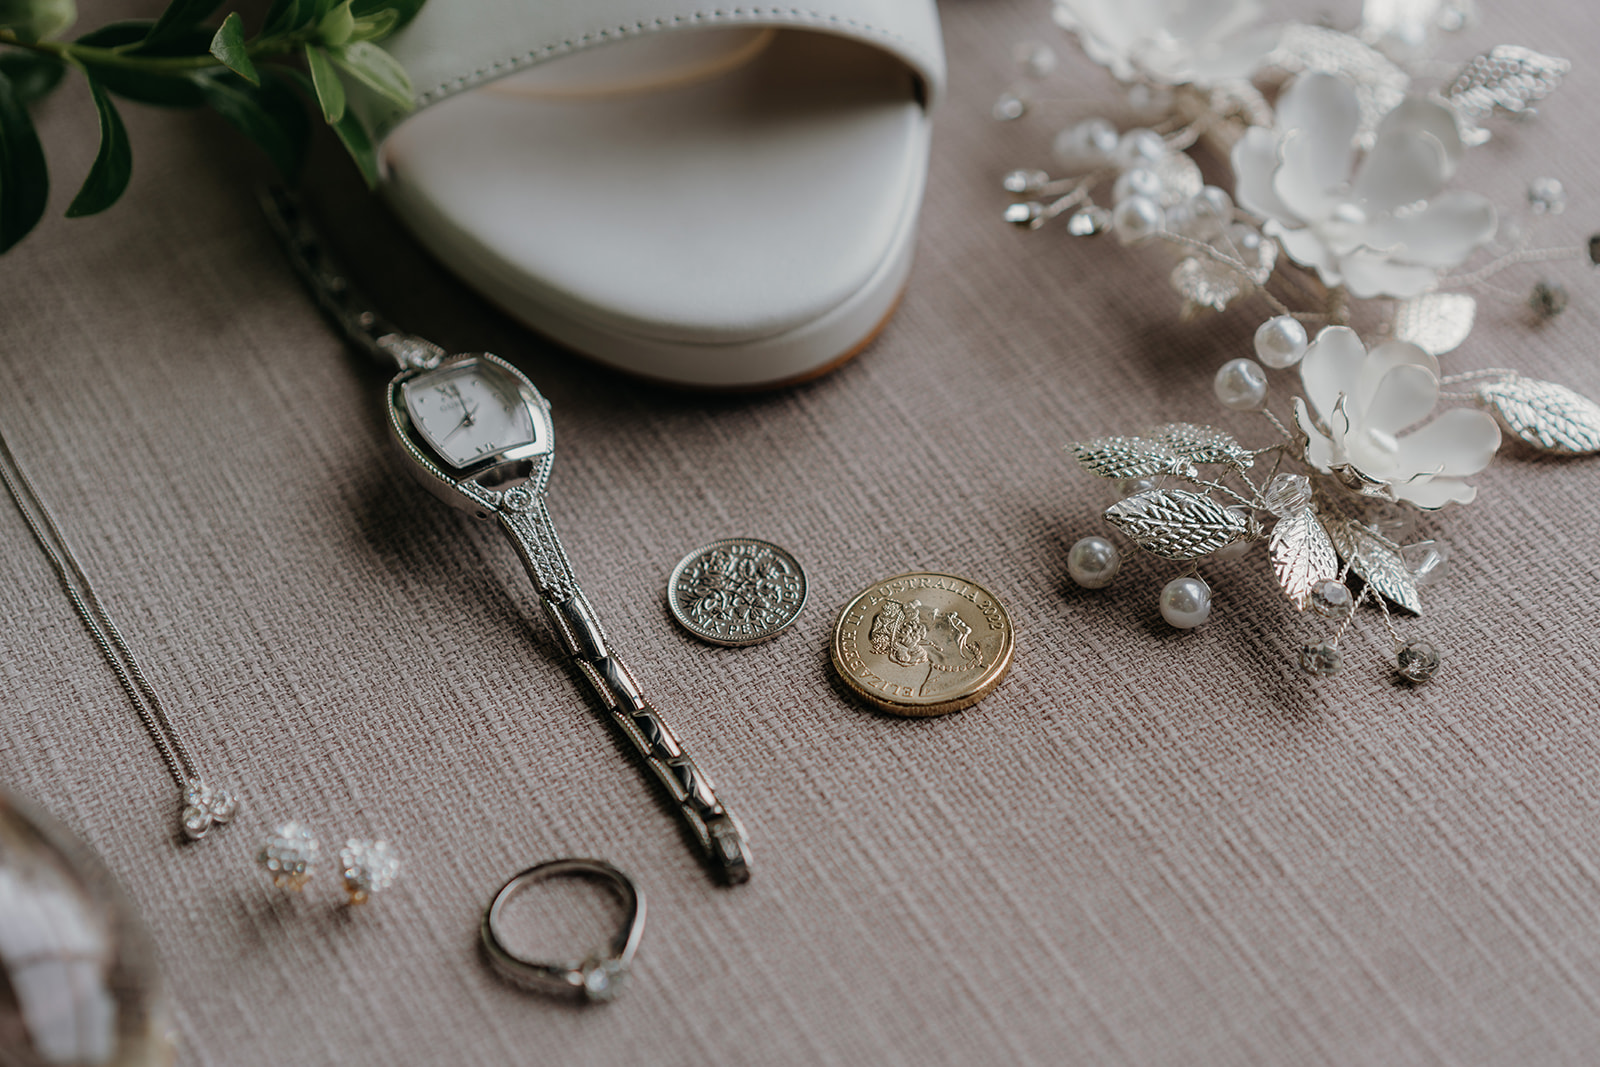 the brides rings and other jewellery are laid out of a cream cushion to be photographed 